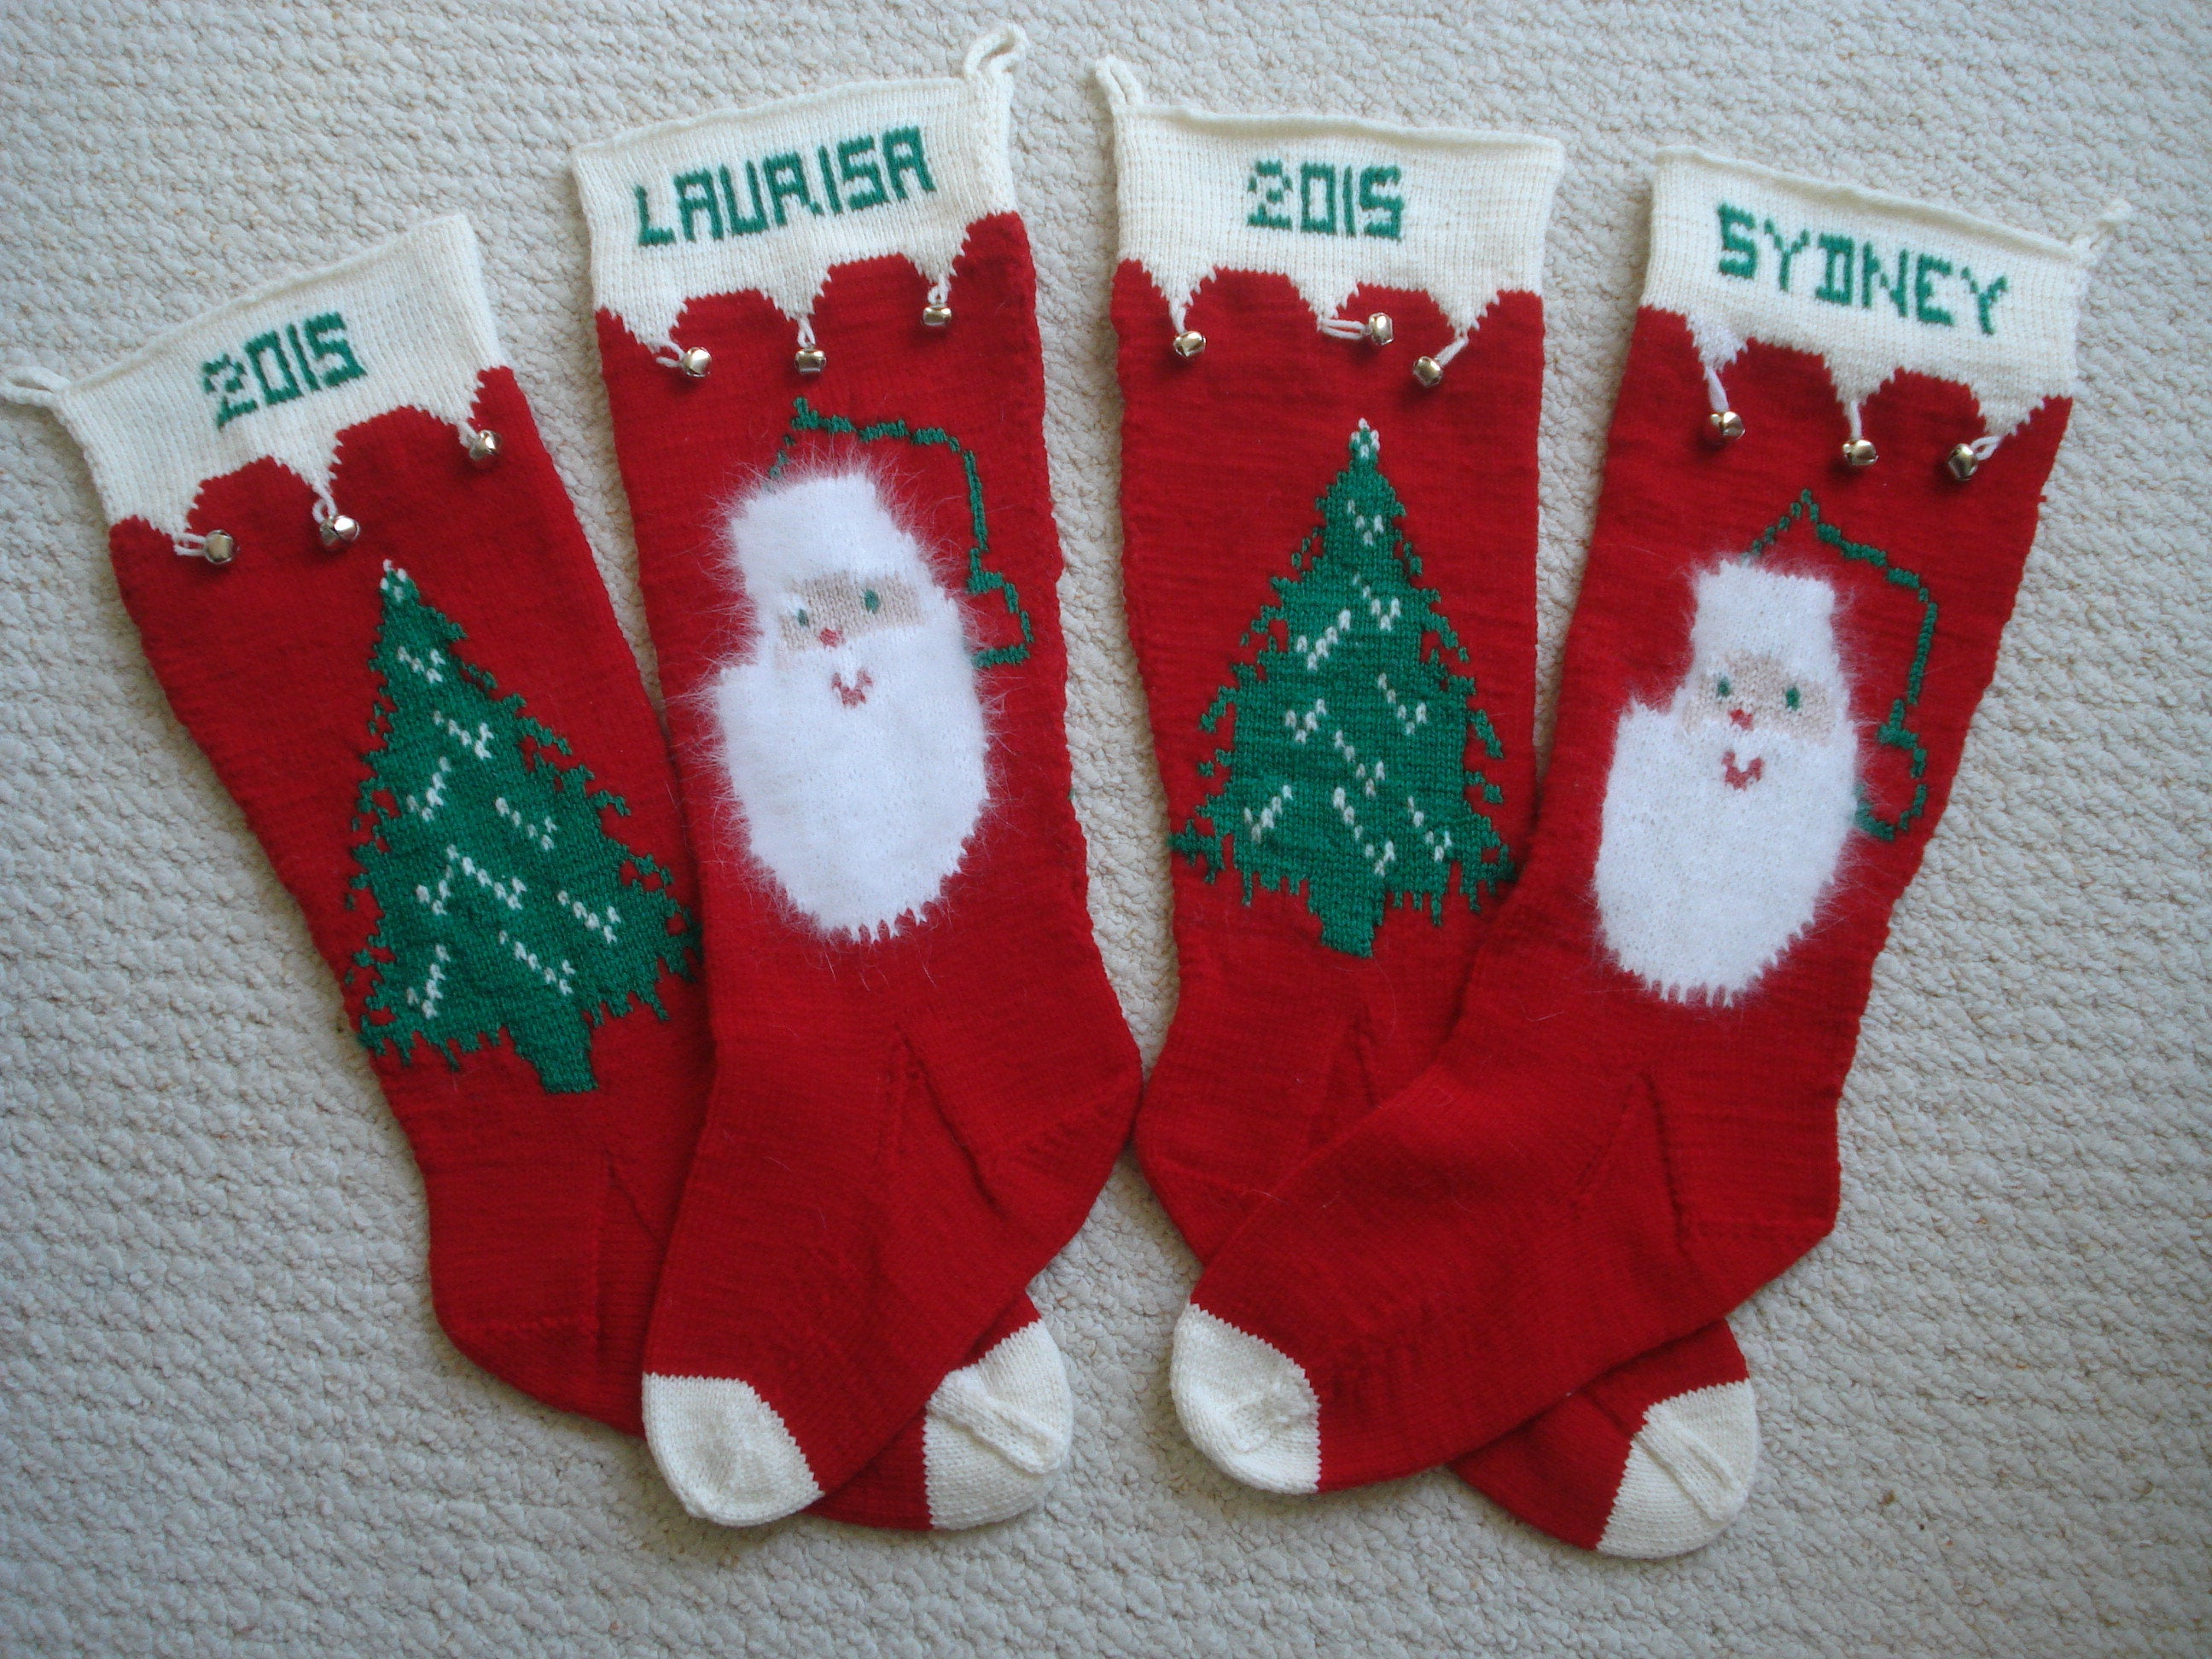 Knitted Christmas Stocking Patterns Personalized Personalized Hand Knit Christmas Stocking For 2020 Delivery Extra Large Size Heirloom Pattern Knit Of Peruvian Wool Shipping Included